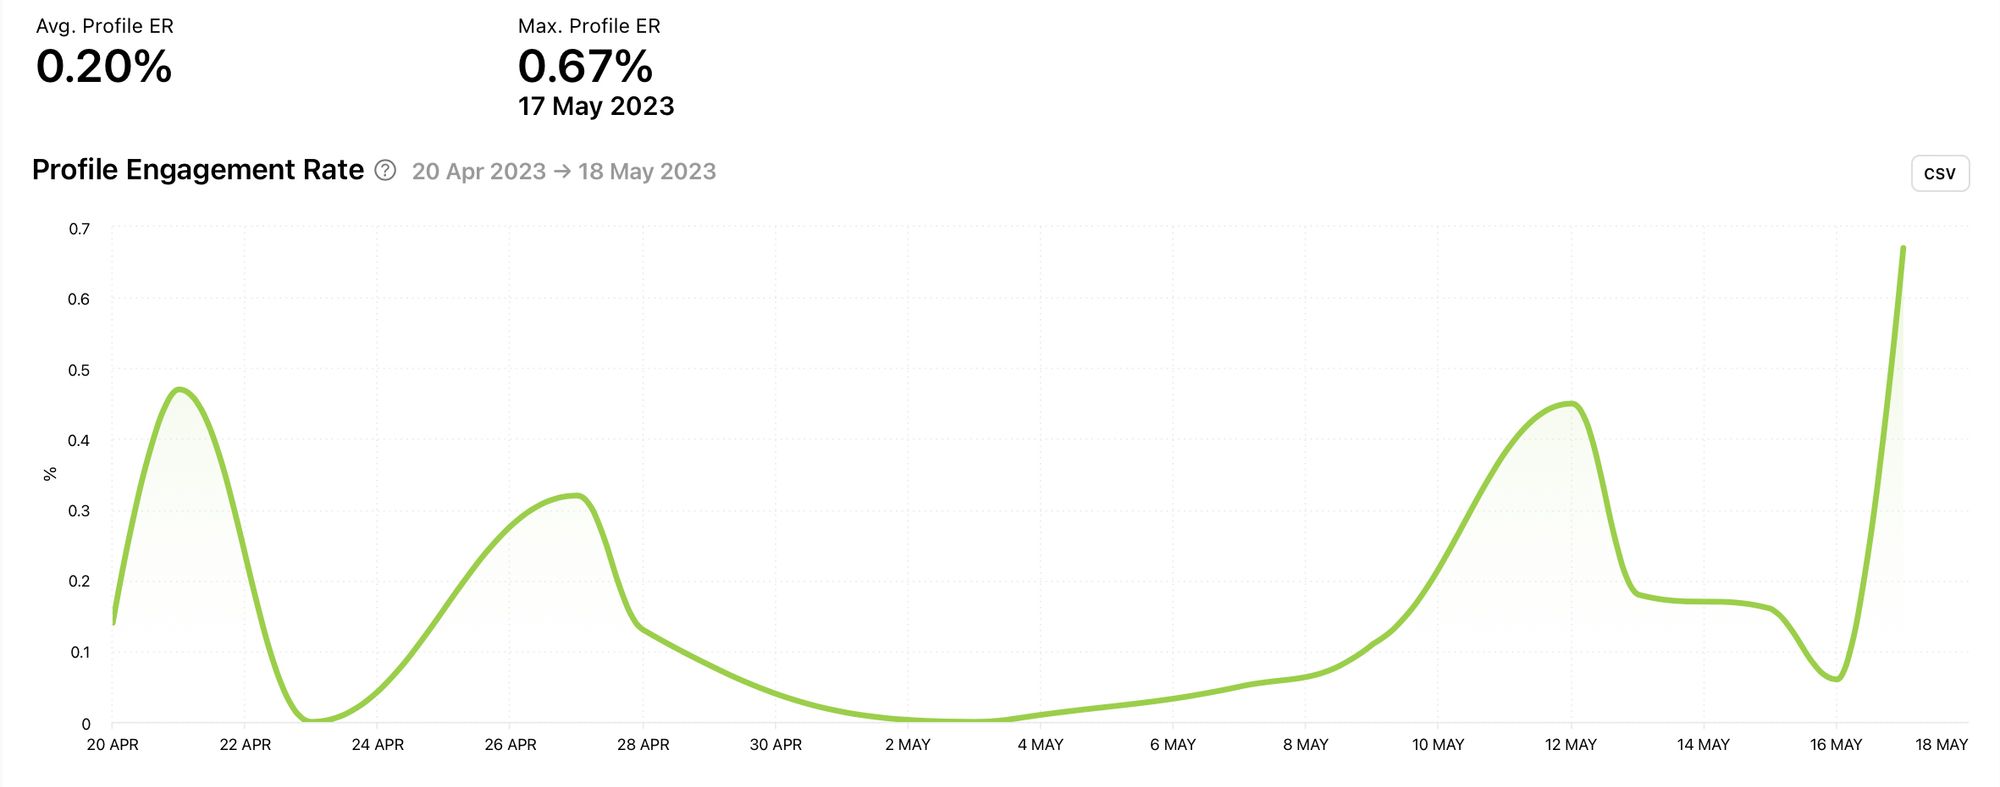 View the profile engagement rate for a competitor over several days